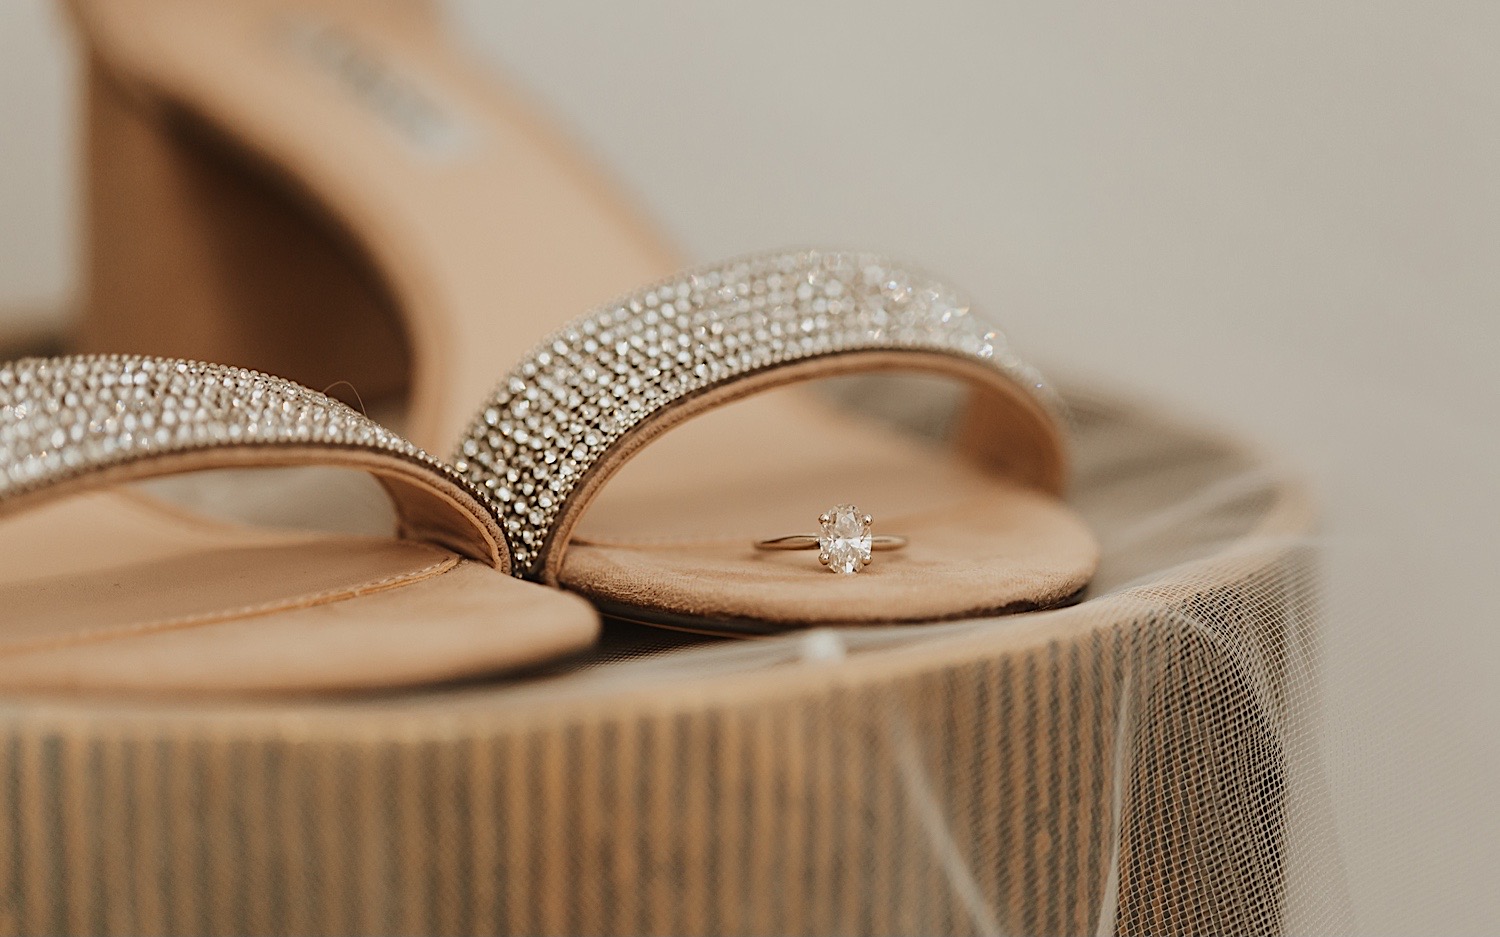 Detail photo of a woman's wedding shoes